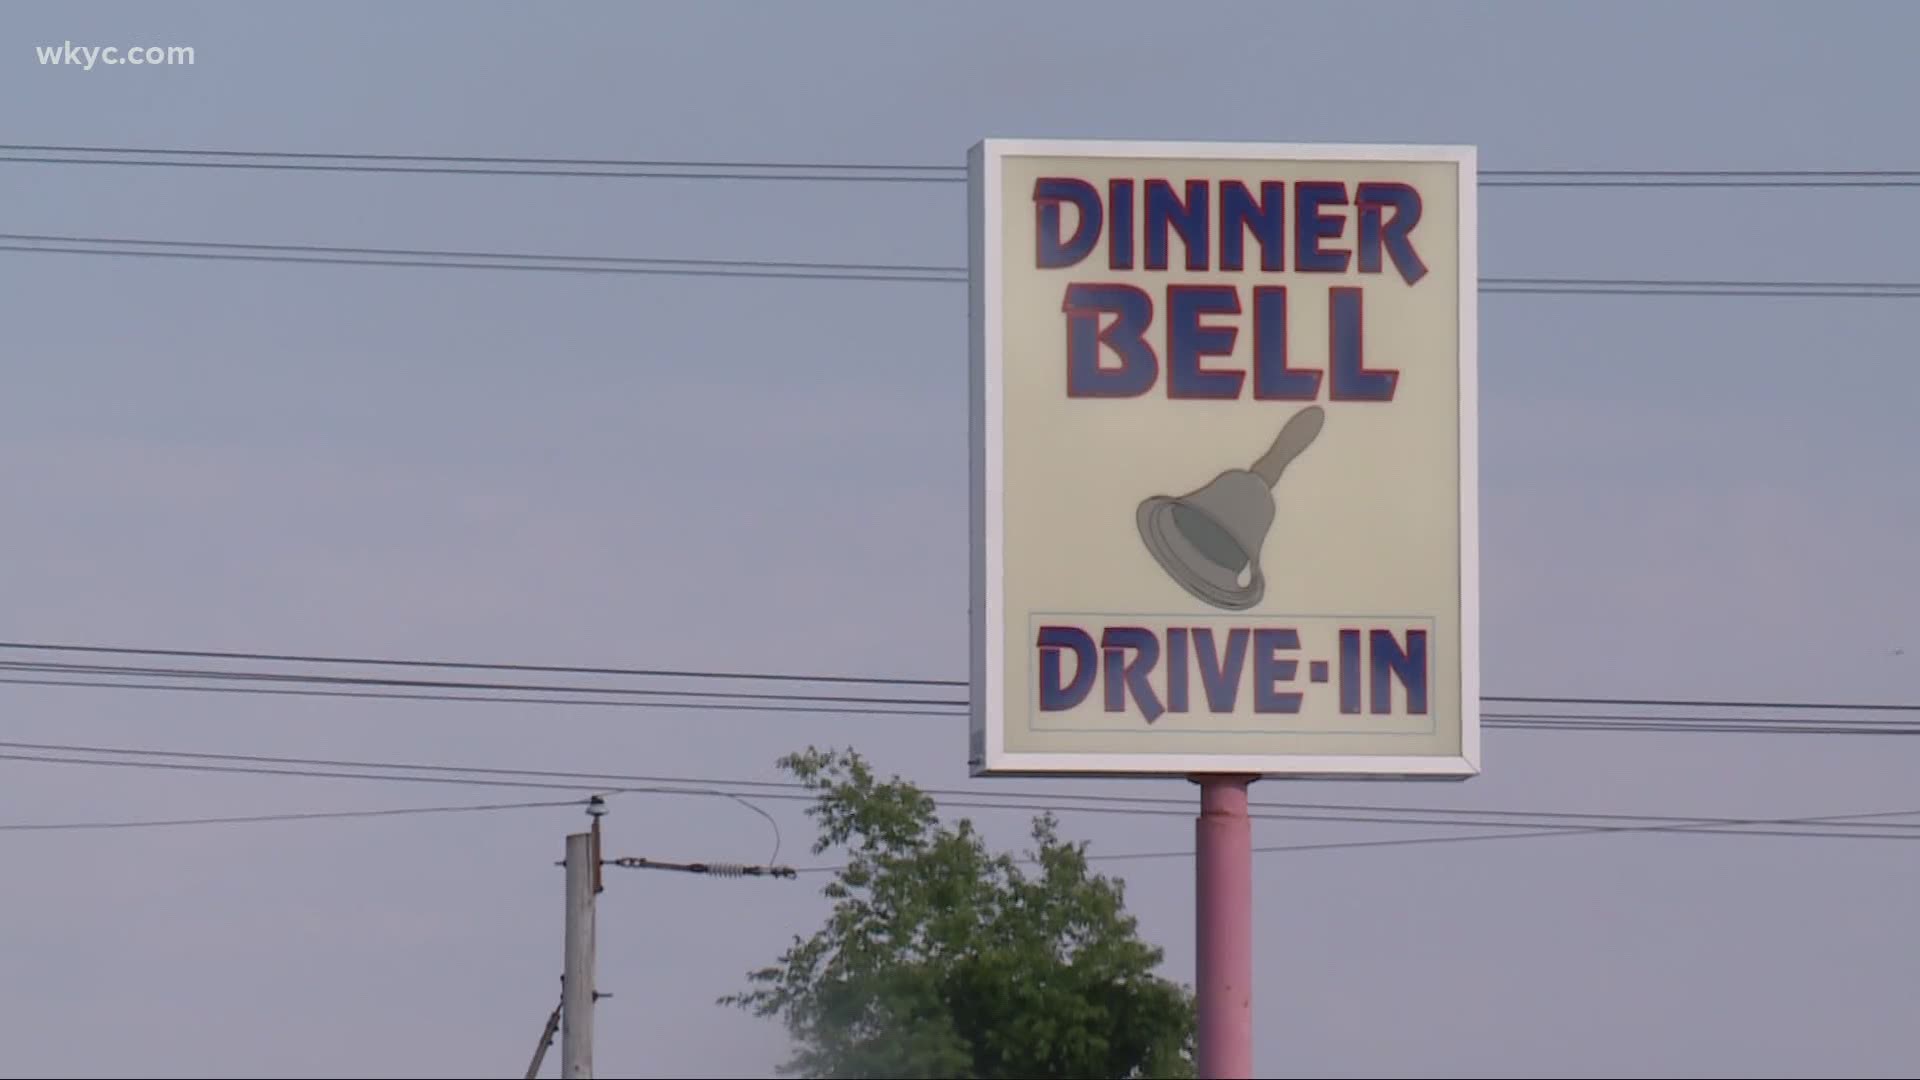 The sign at Dinner Bell had apparently been changed by Saturday night. We have reached out to the owners for comment but have not heard back from them.